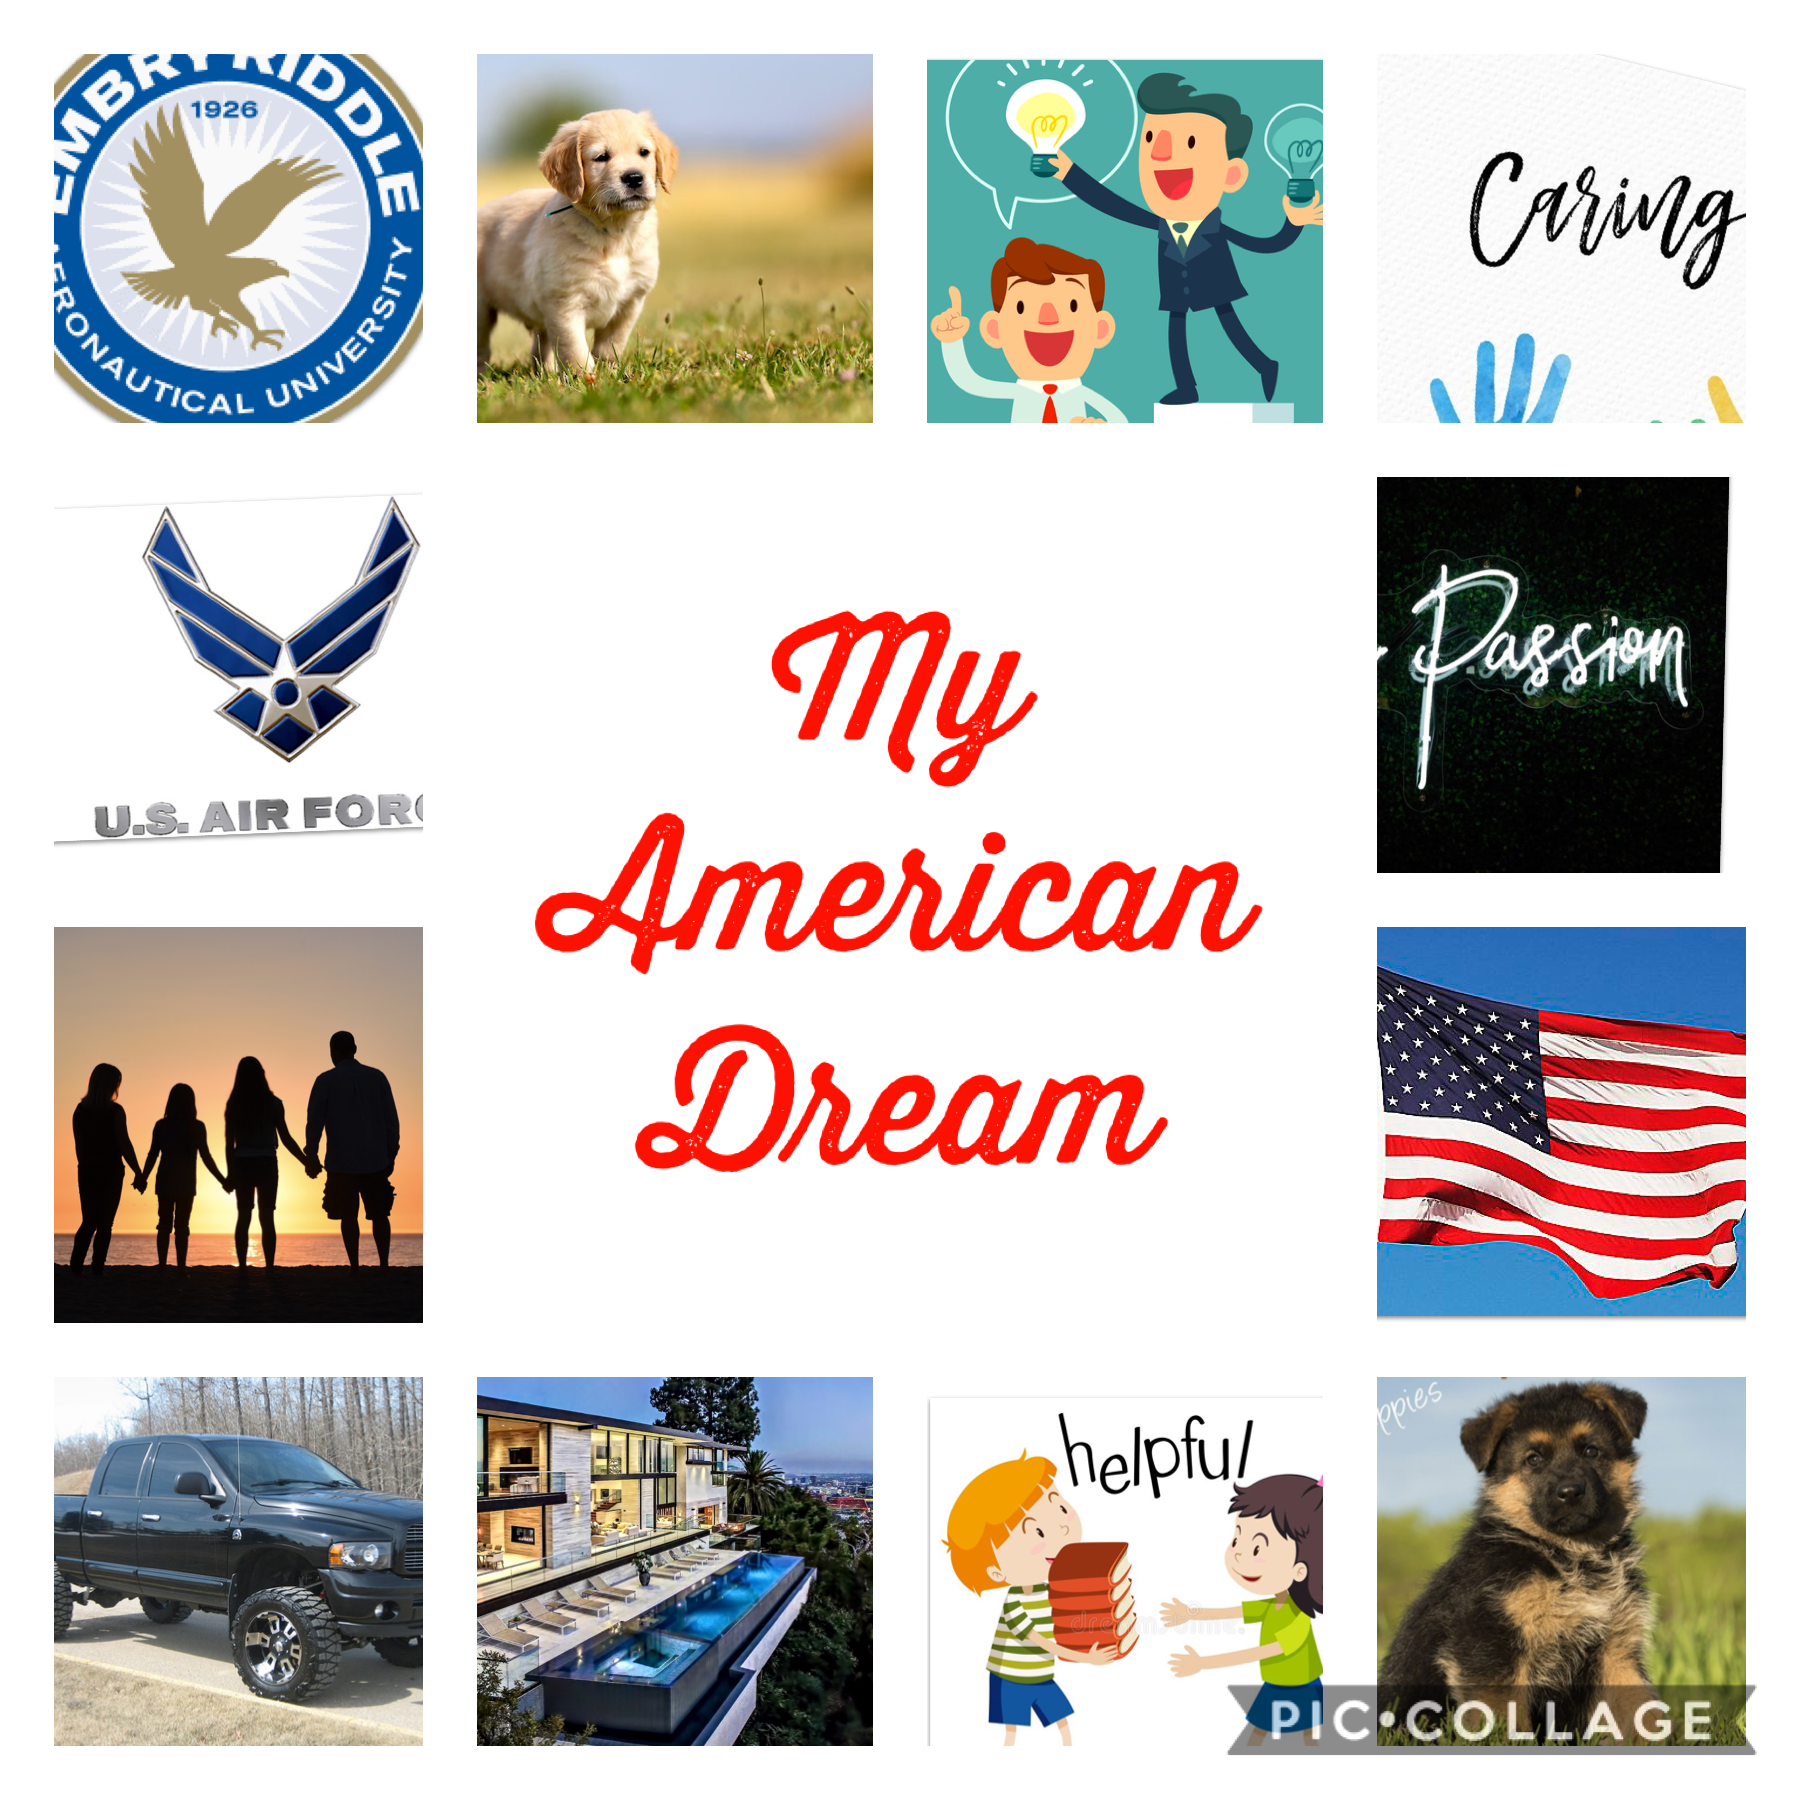 Had a project for English class about American Dream really got me thinking 